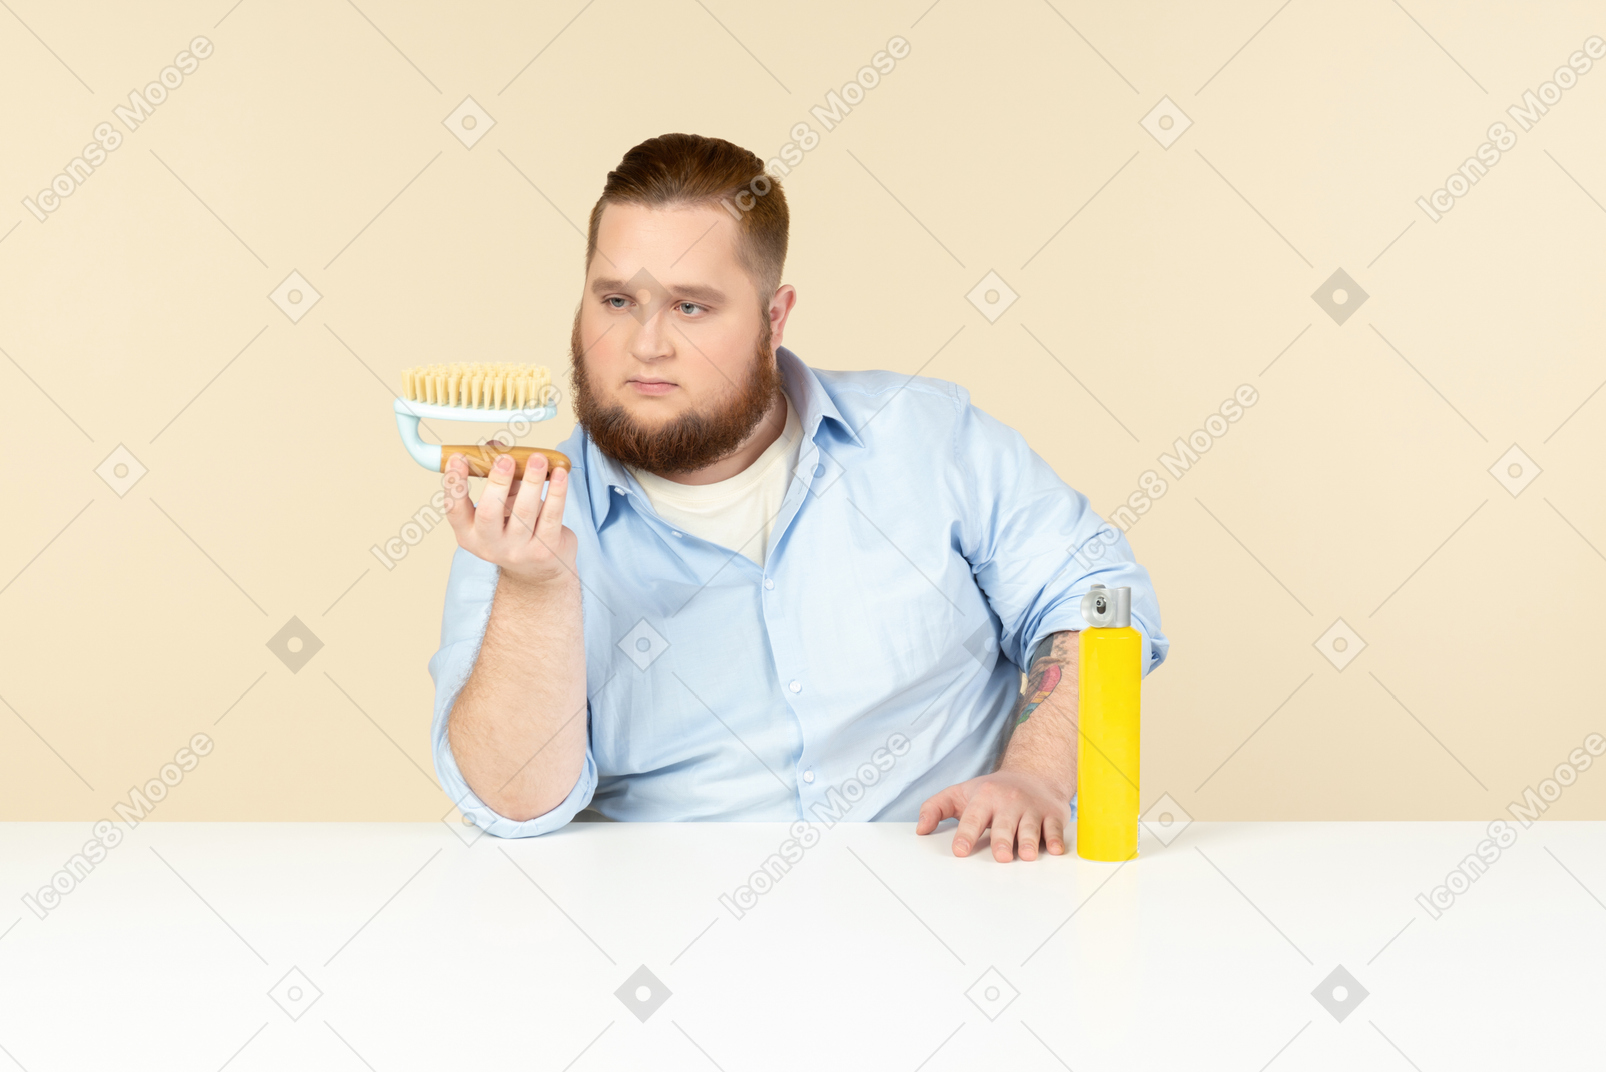 Young overweight househusband sitting at the table and looking at brush